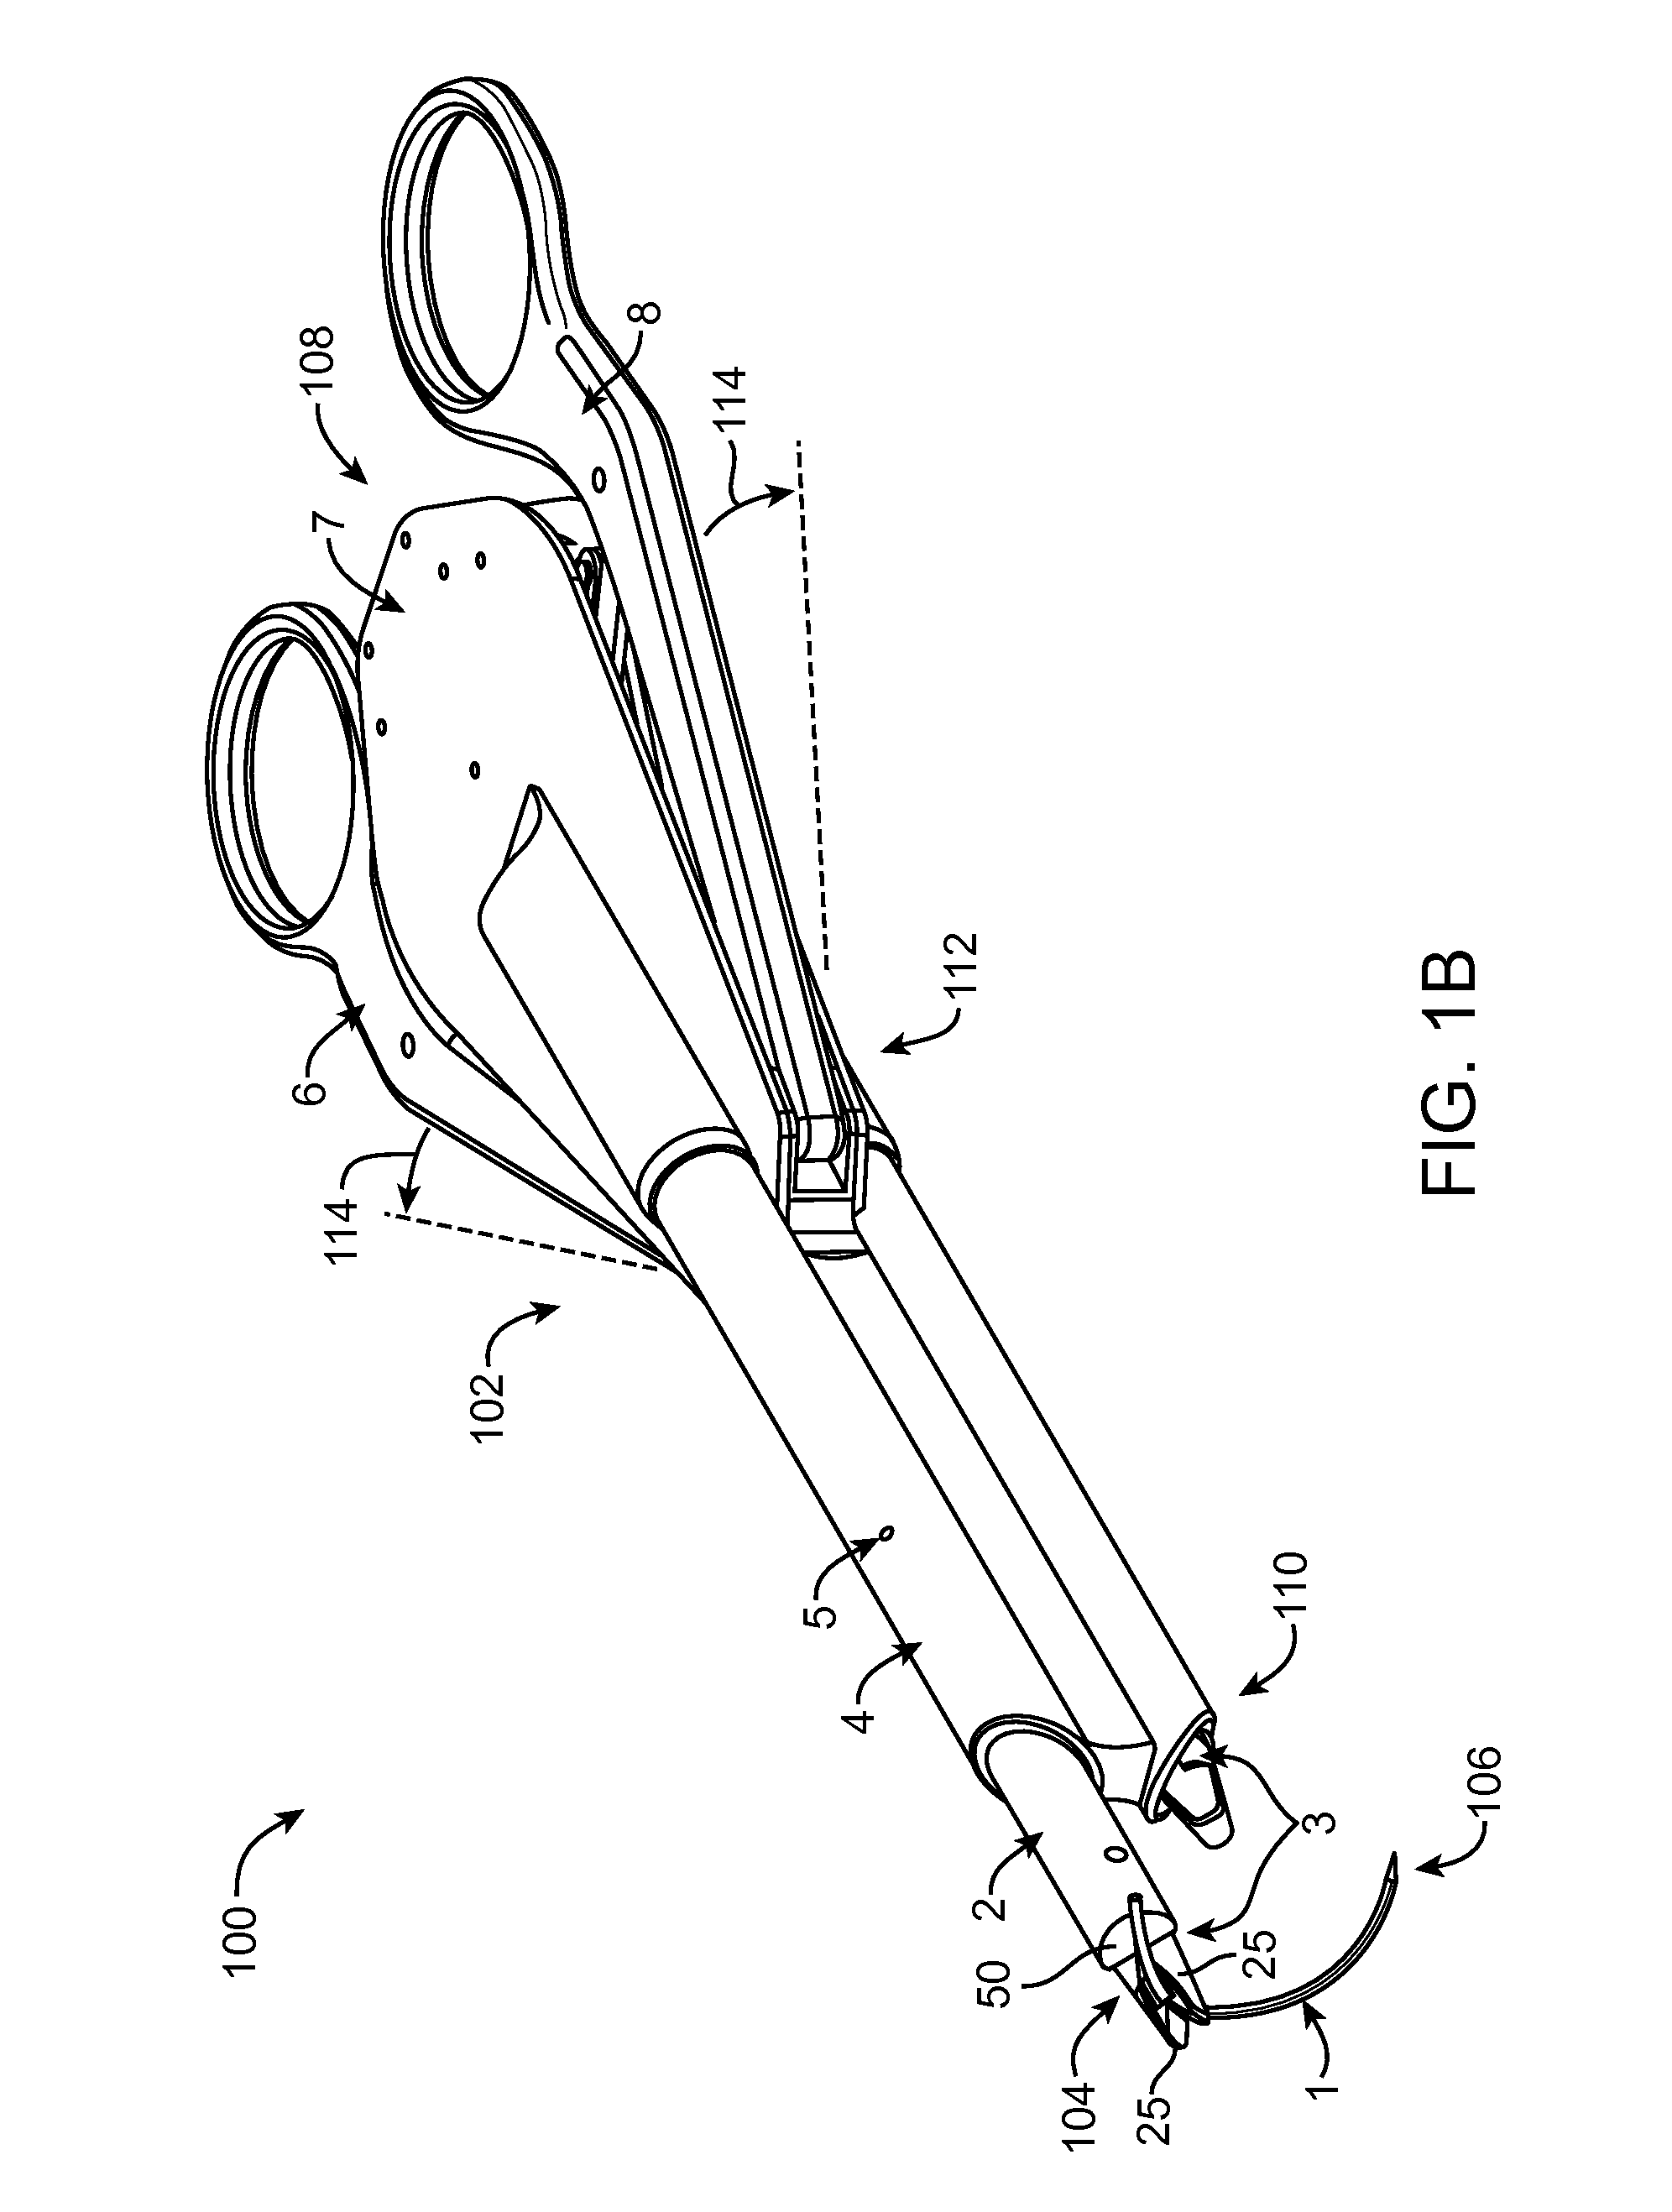 Offset jaw suturing device, system, and methods